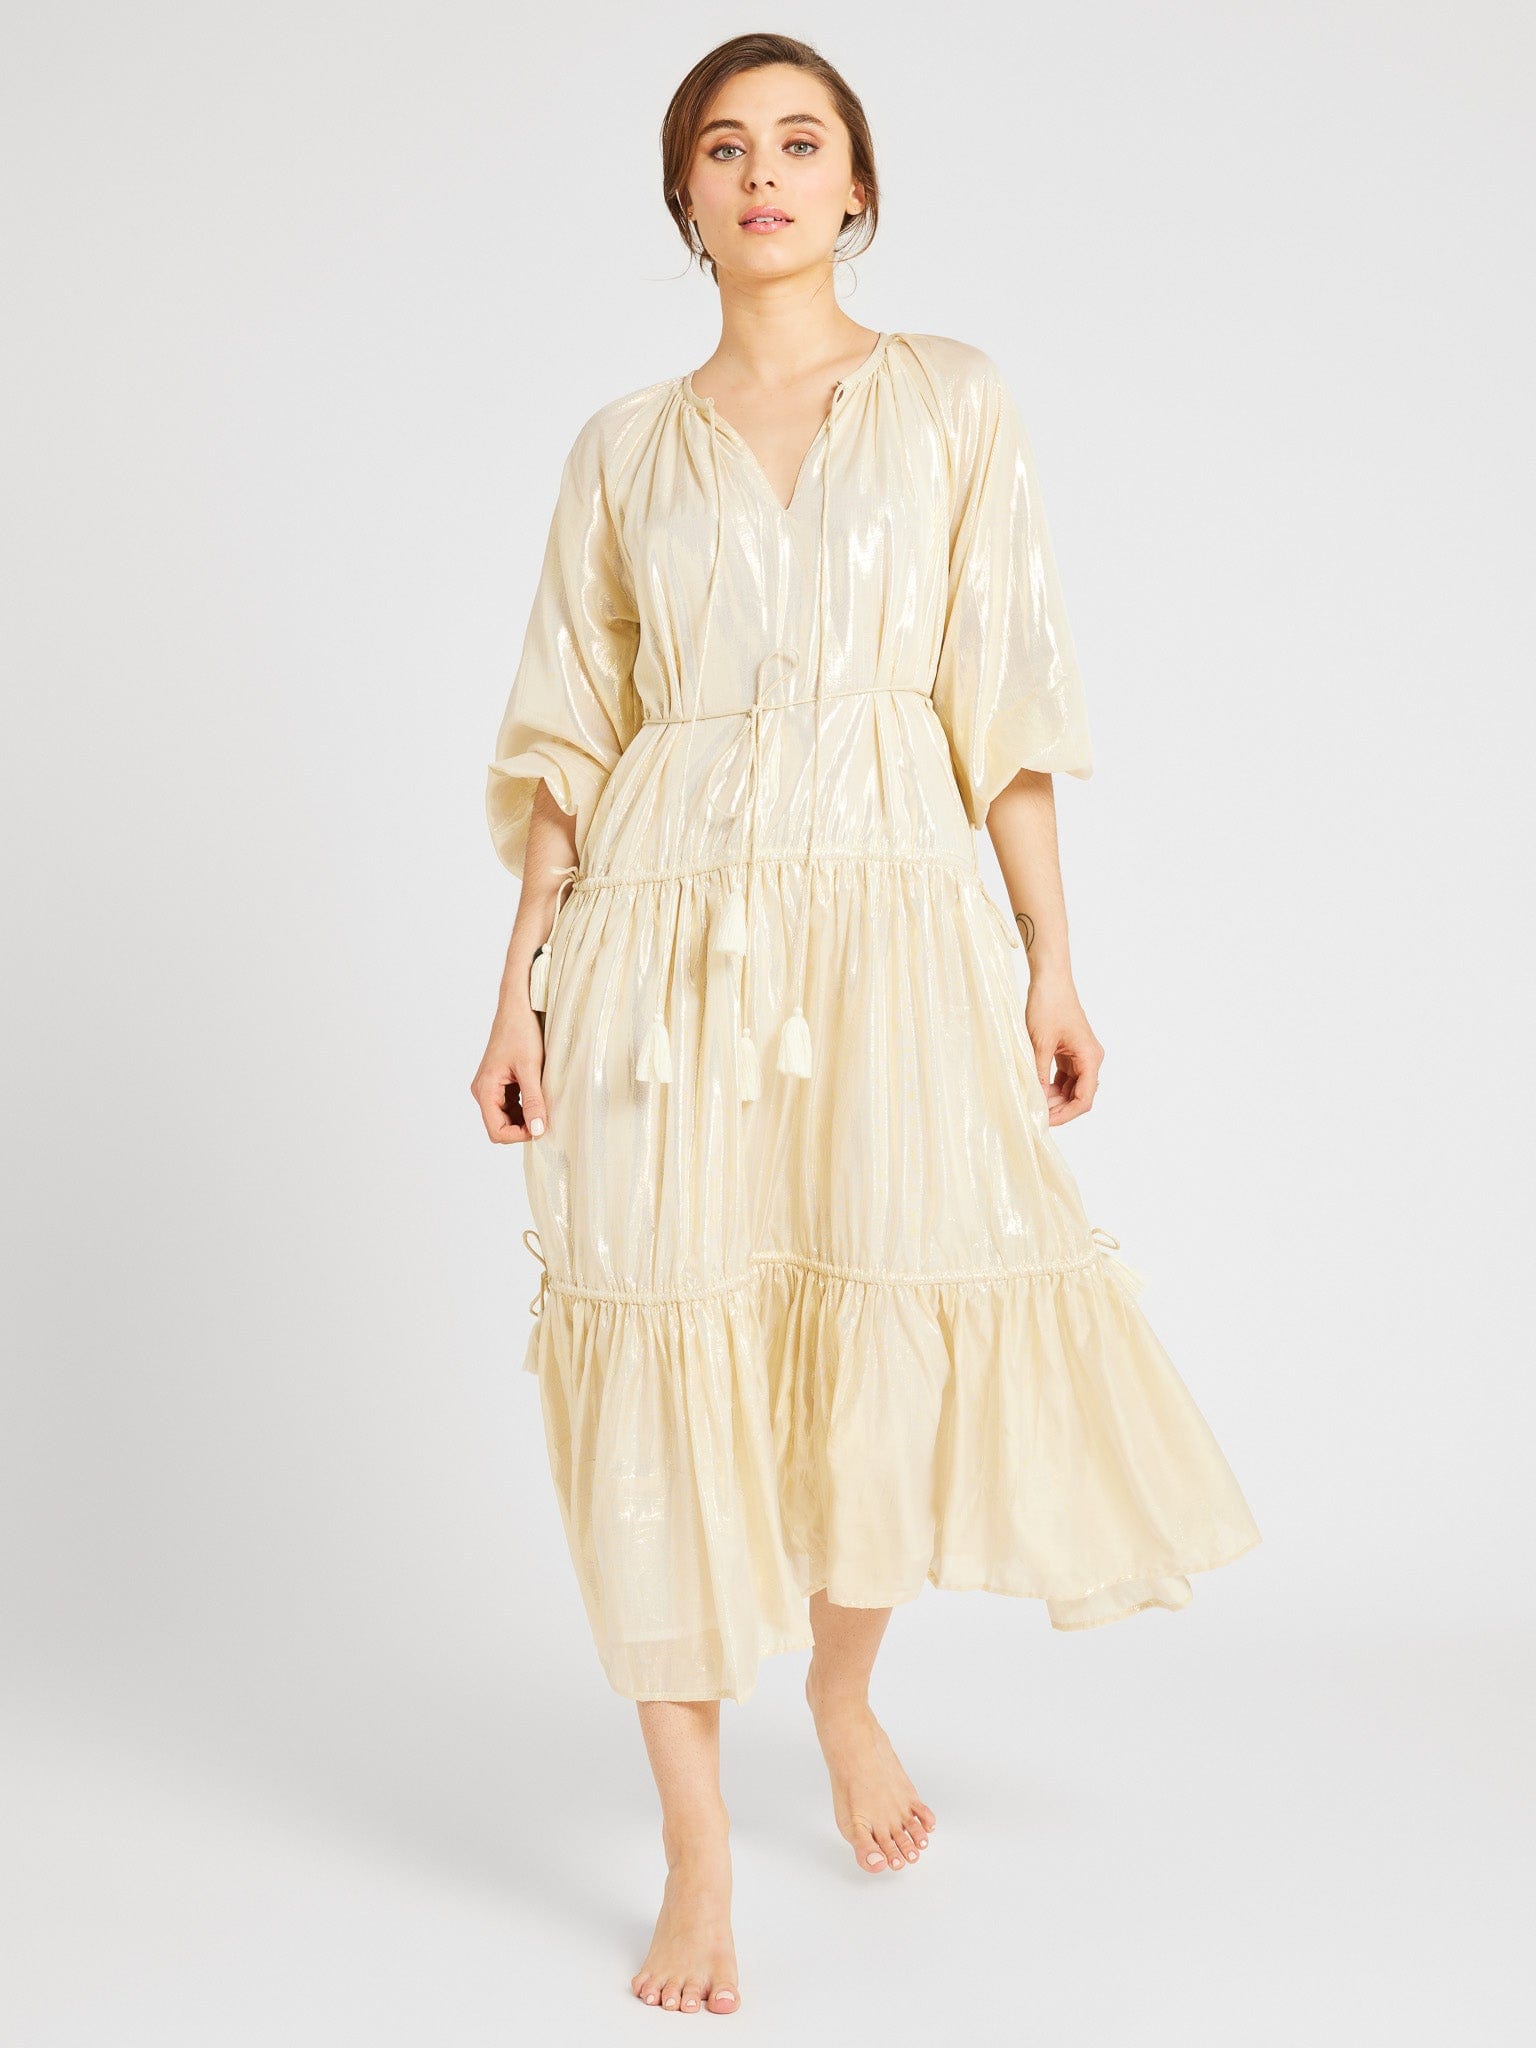 MILLE Clothing Natalia Dress in Gold Lamé